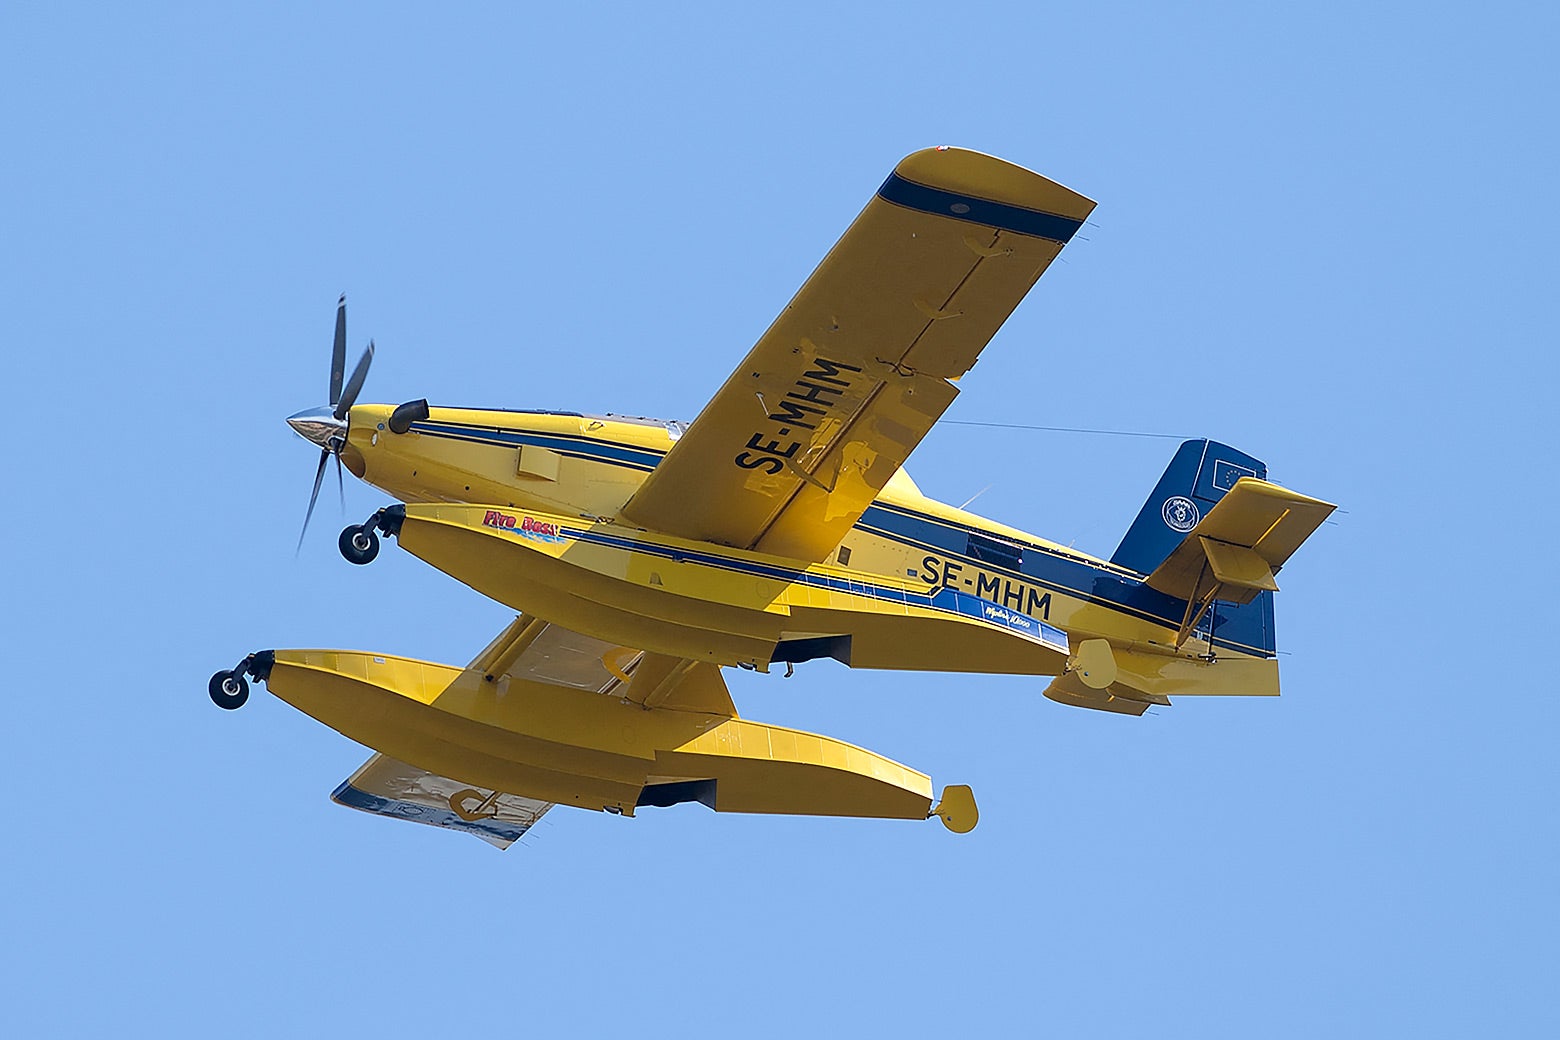 A yellow Air Tractor AT-802 Fire Boss aircraft.